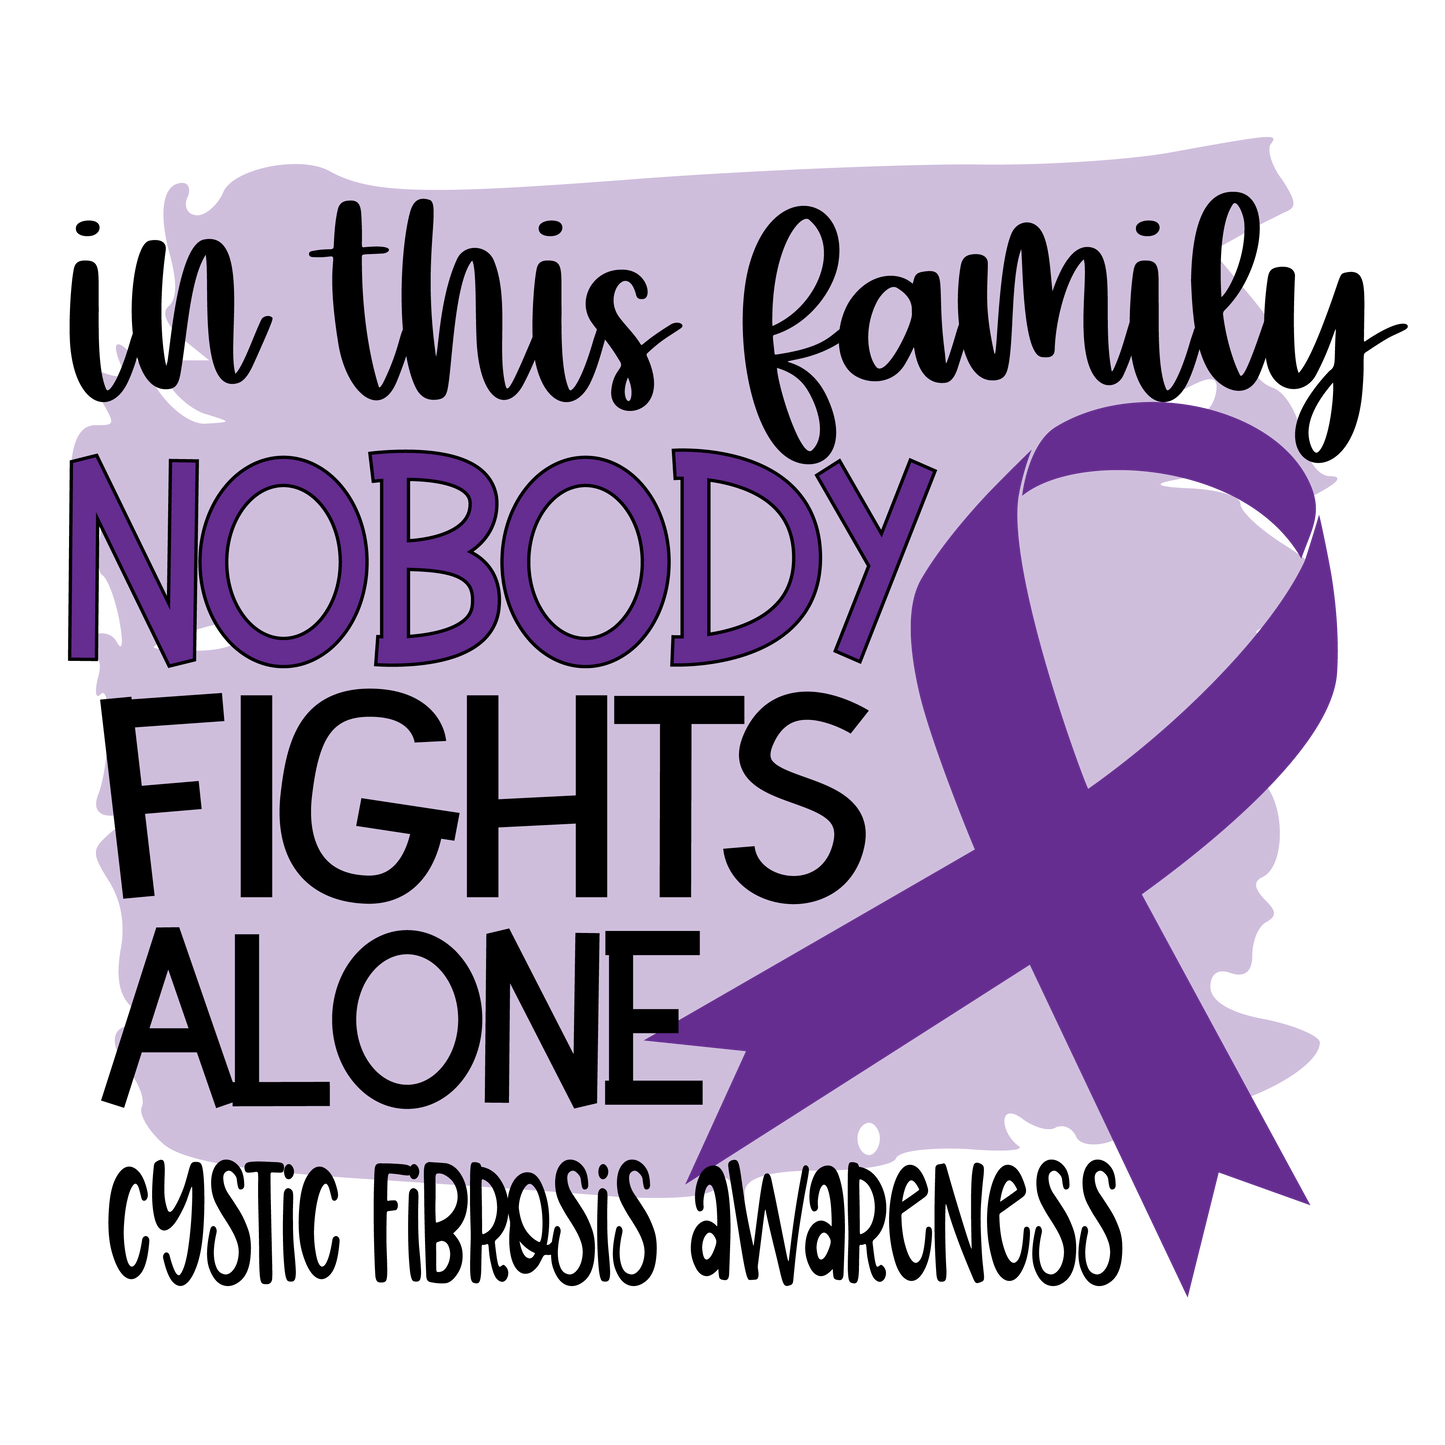 Nobody Fights Alone Cystic Fibrosis Purple Ribbon  Youth and Adult Sizes